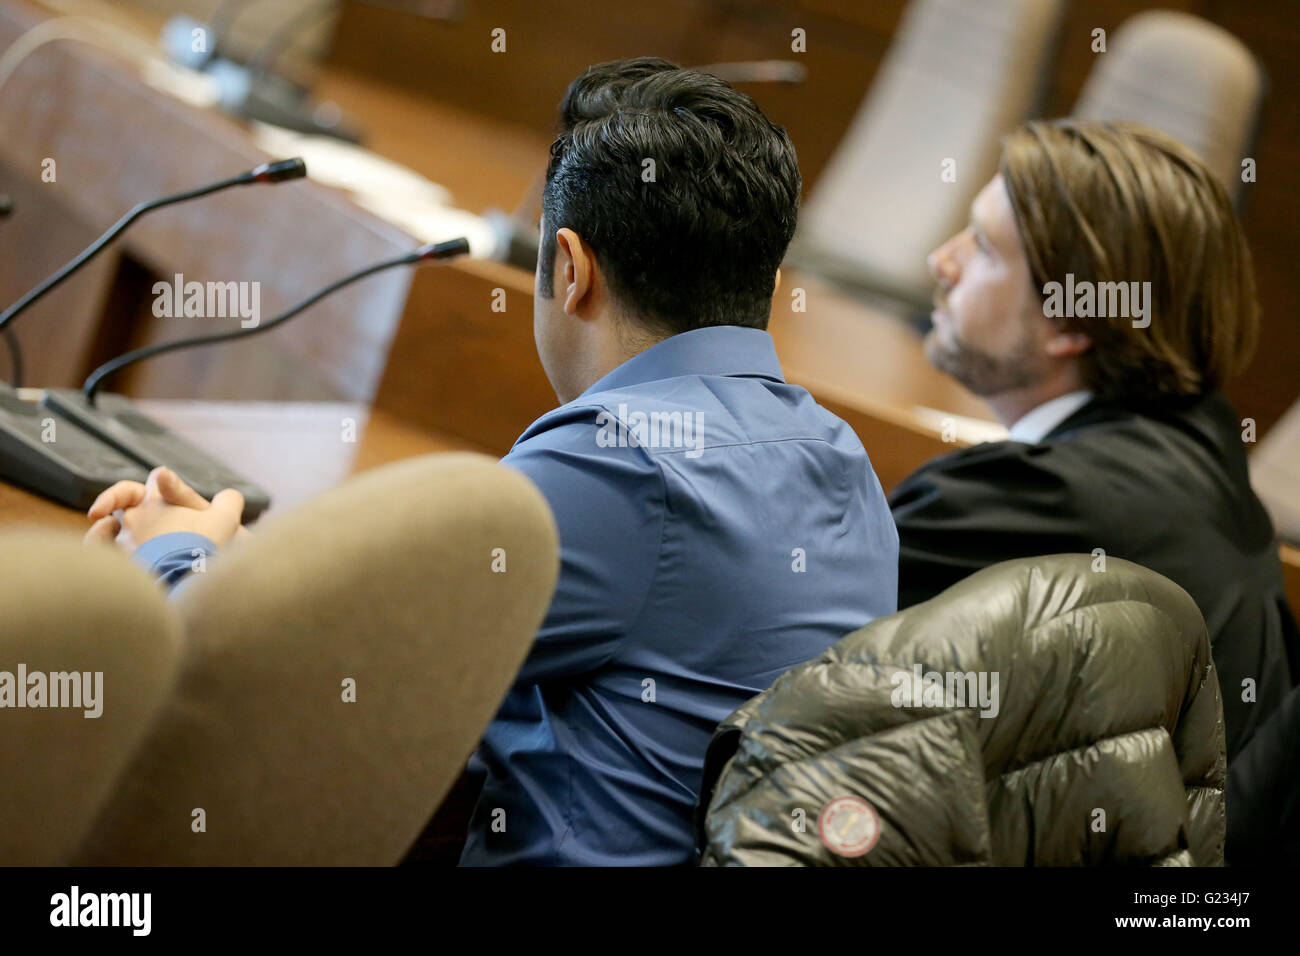 Cologne, Germany. 23rd May, 2016. Defendant Armin J. sits next to his attorney Dominic Maraffa (R) in a courtroom of the regional court in Cologne, Germany, 23 May 2016. After a fatal speeding accident, the defendant has been sentenced to two years and nine months in prison. Last year, the 27-year-old man sped along a street in the city centre of Cologne at more than 100 kilometres per hour. He lost control over his car and crashed into a cyclist who subsequently died from his injuries. Photo: OLIVER BERG/dpa/Alamy Live News Stock Photo